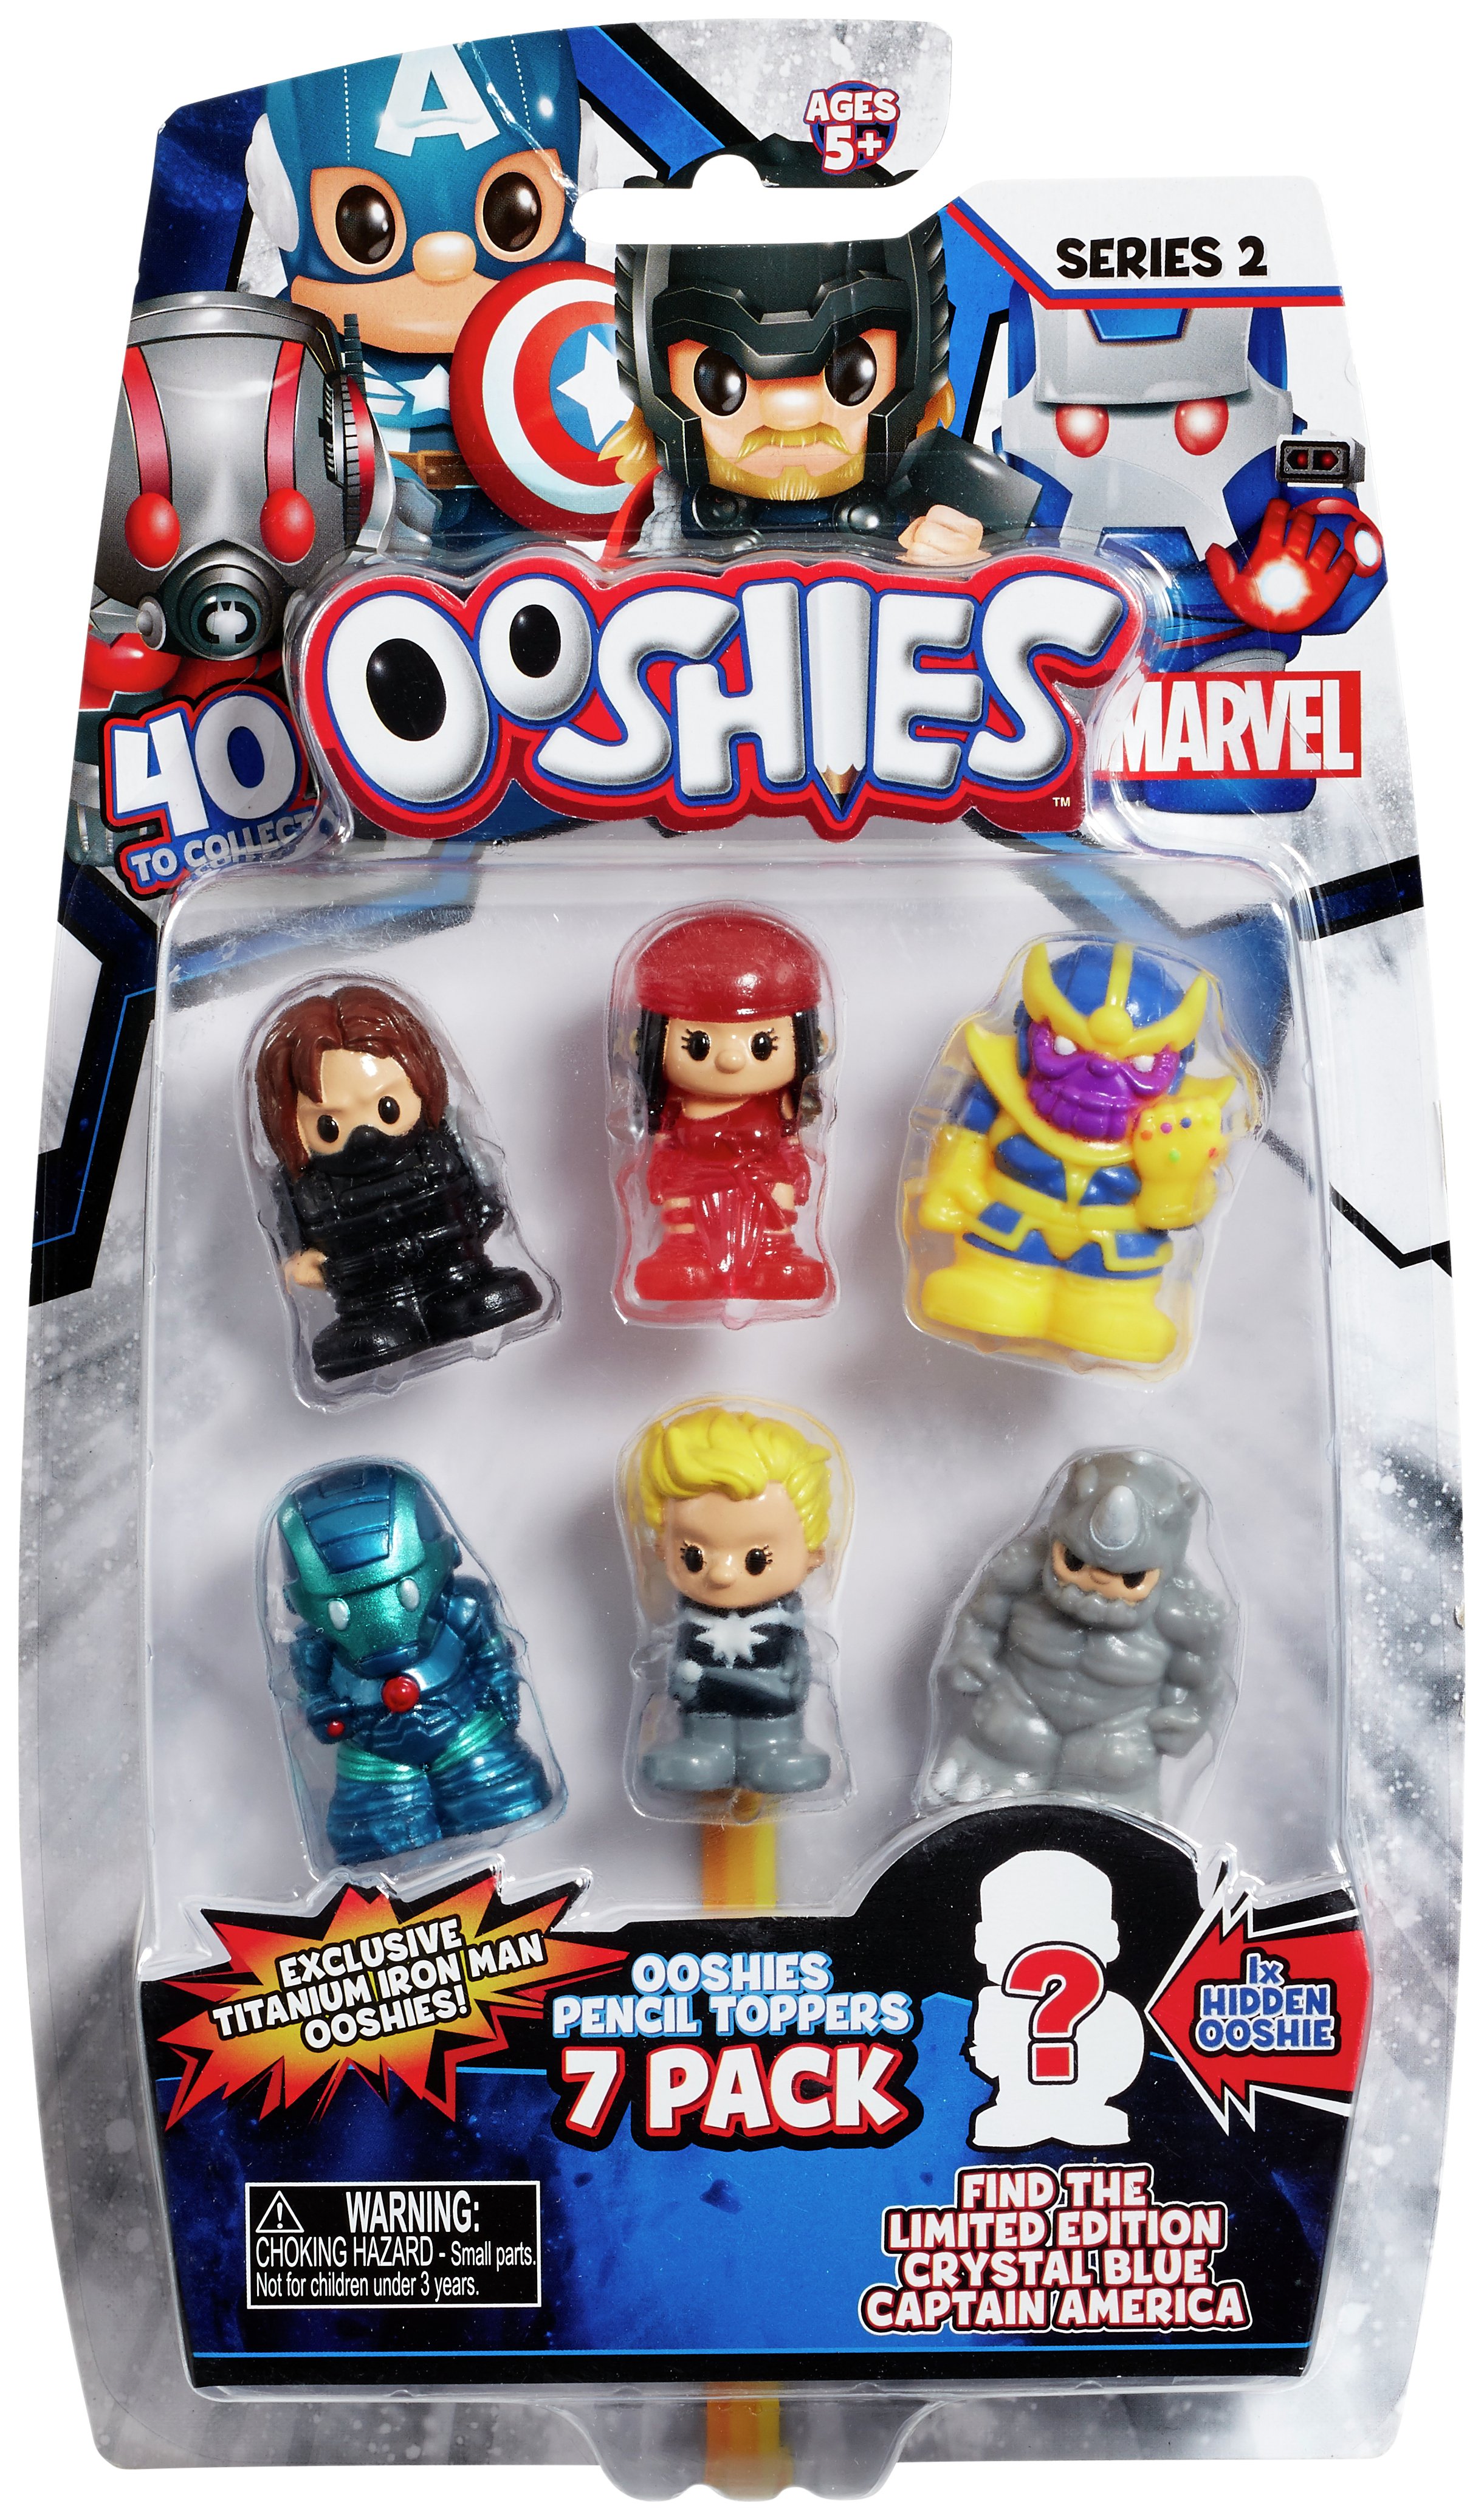 Ooshies Marvel & DC Comics Pencil Toppers - 7 Pack.